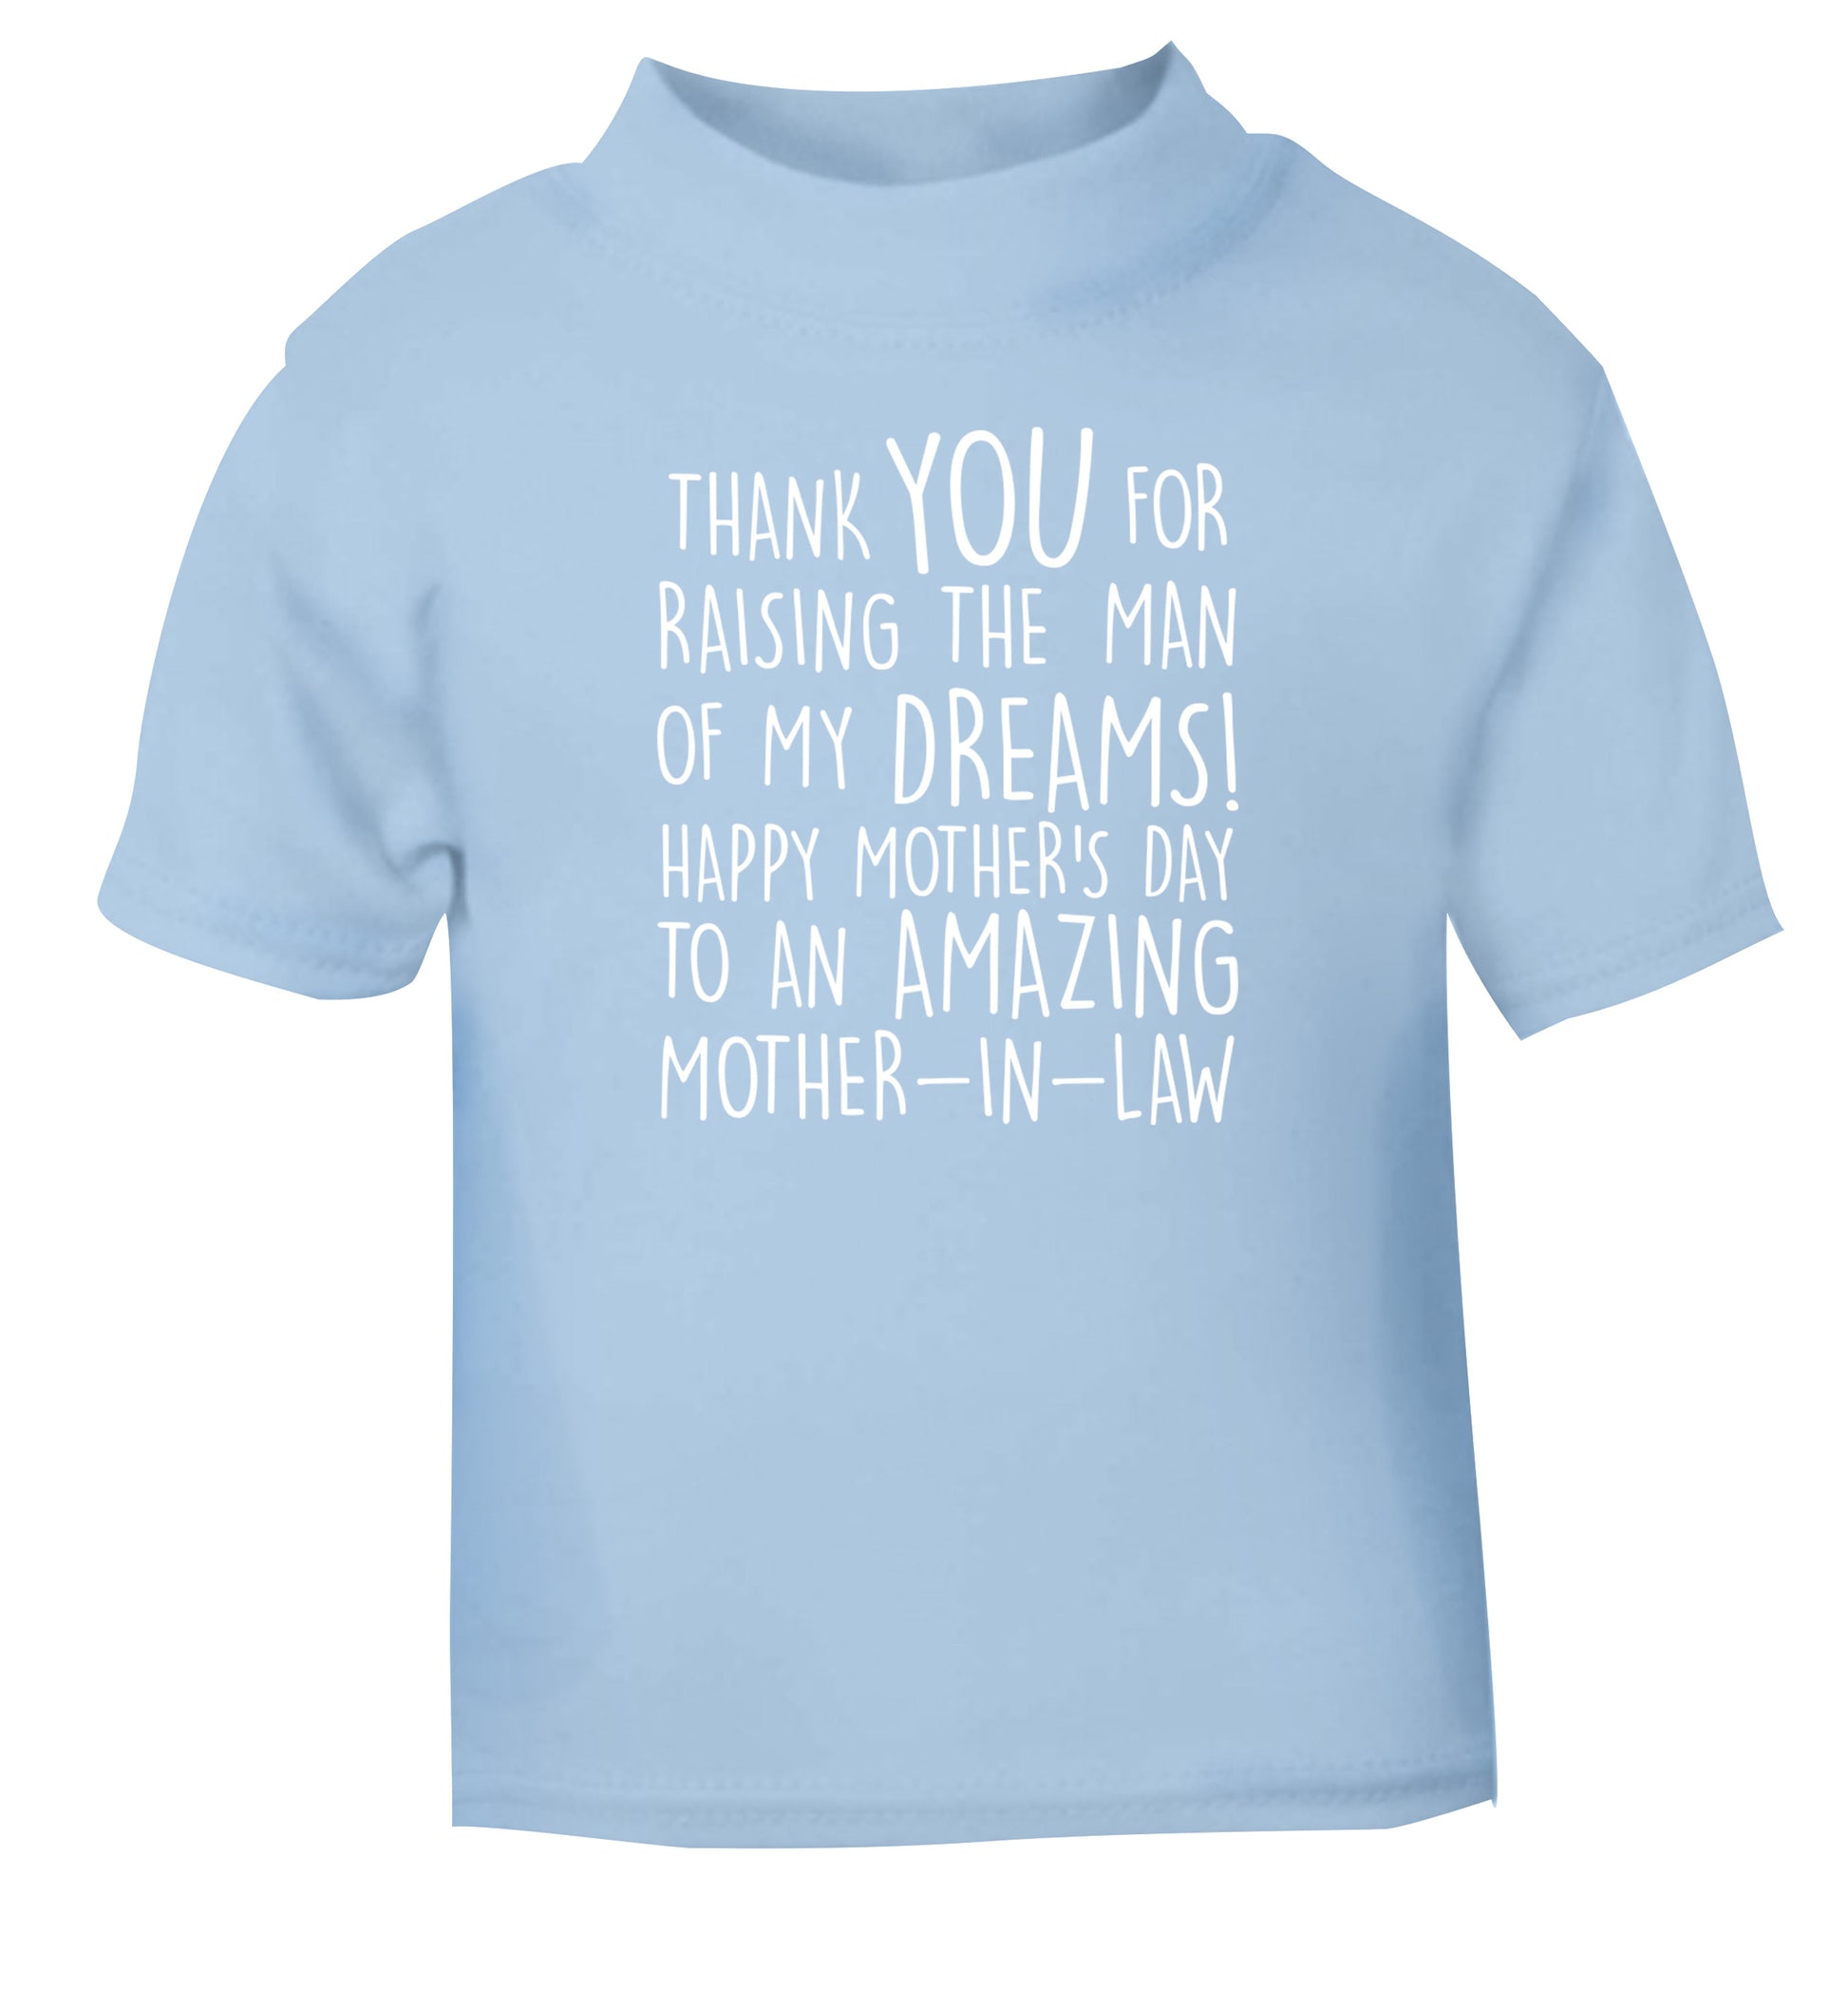 Thank you for raising the man of my dreams happy mother's day mother-in-law light blue Baby Toddler Tshirt 2 Years